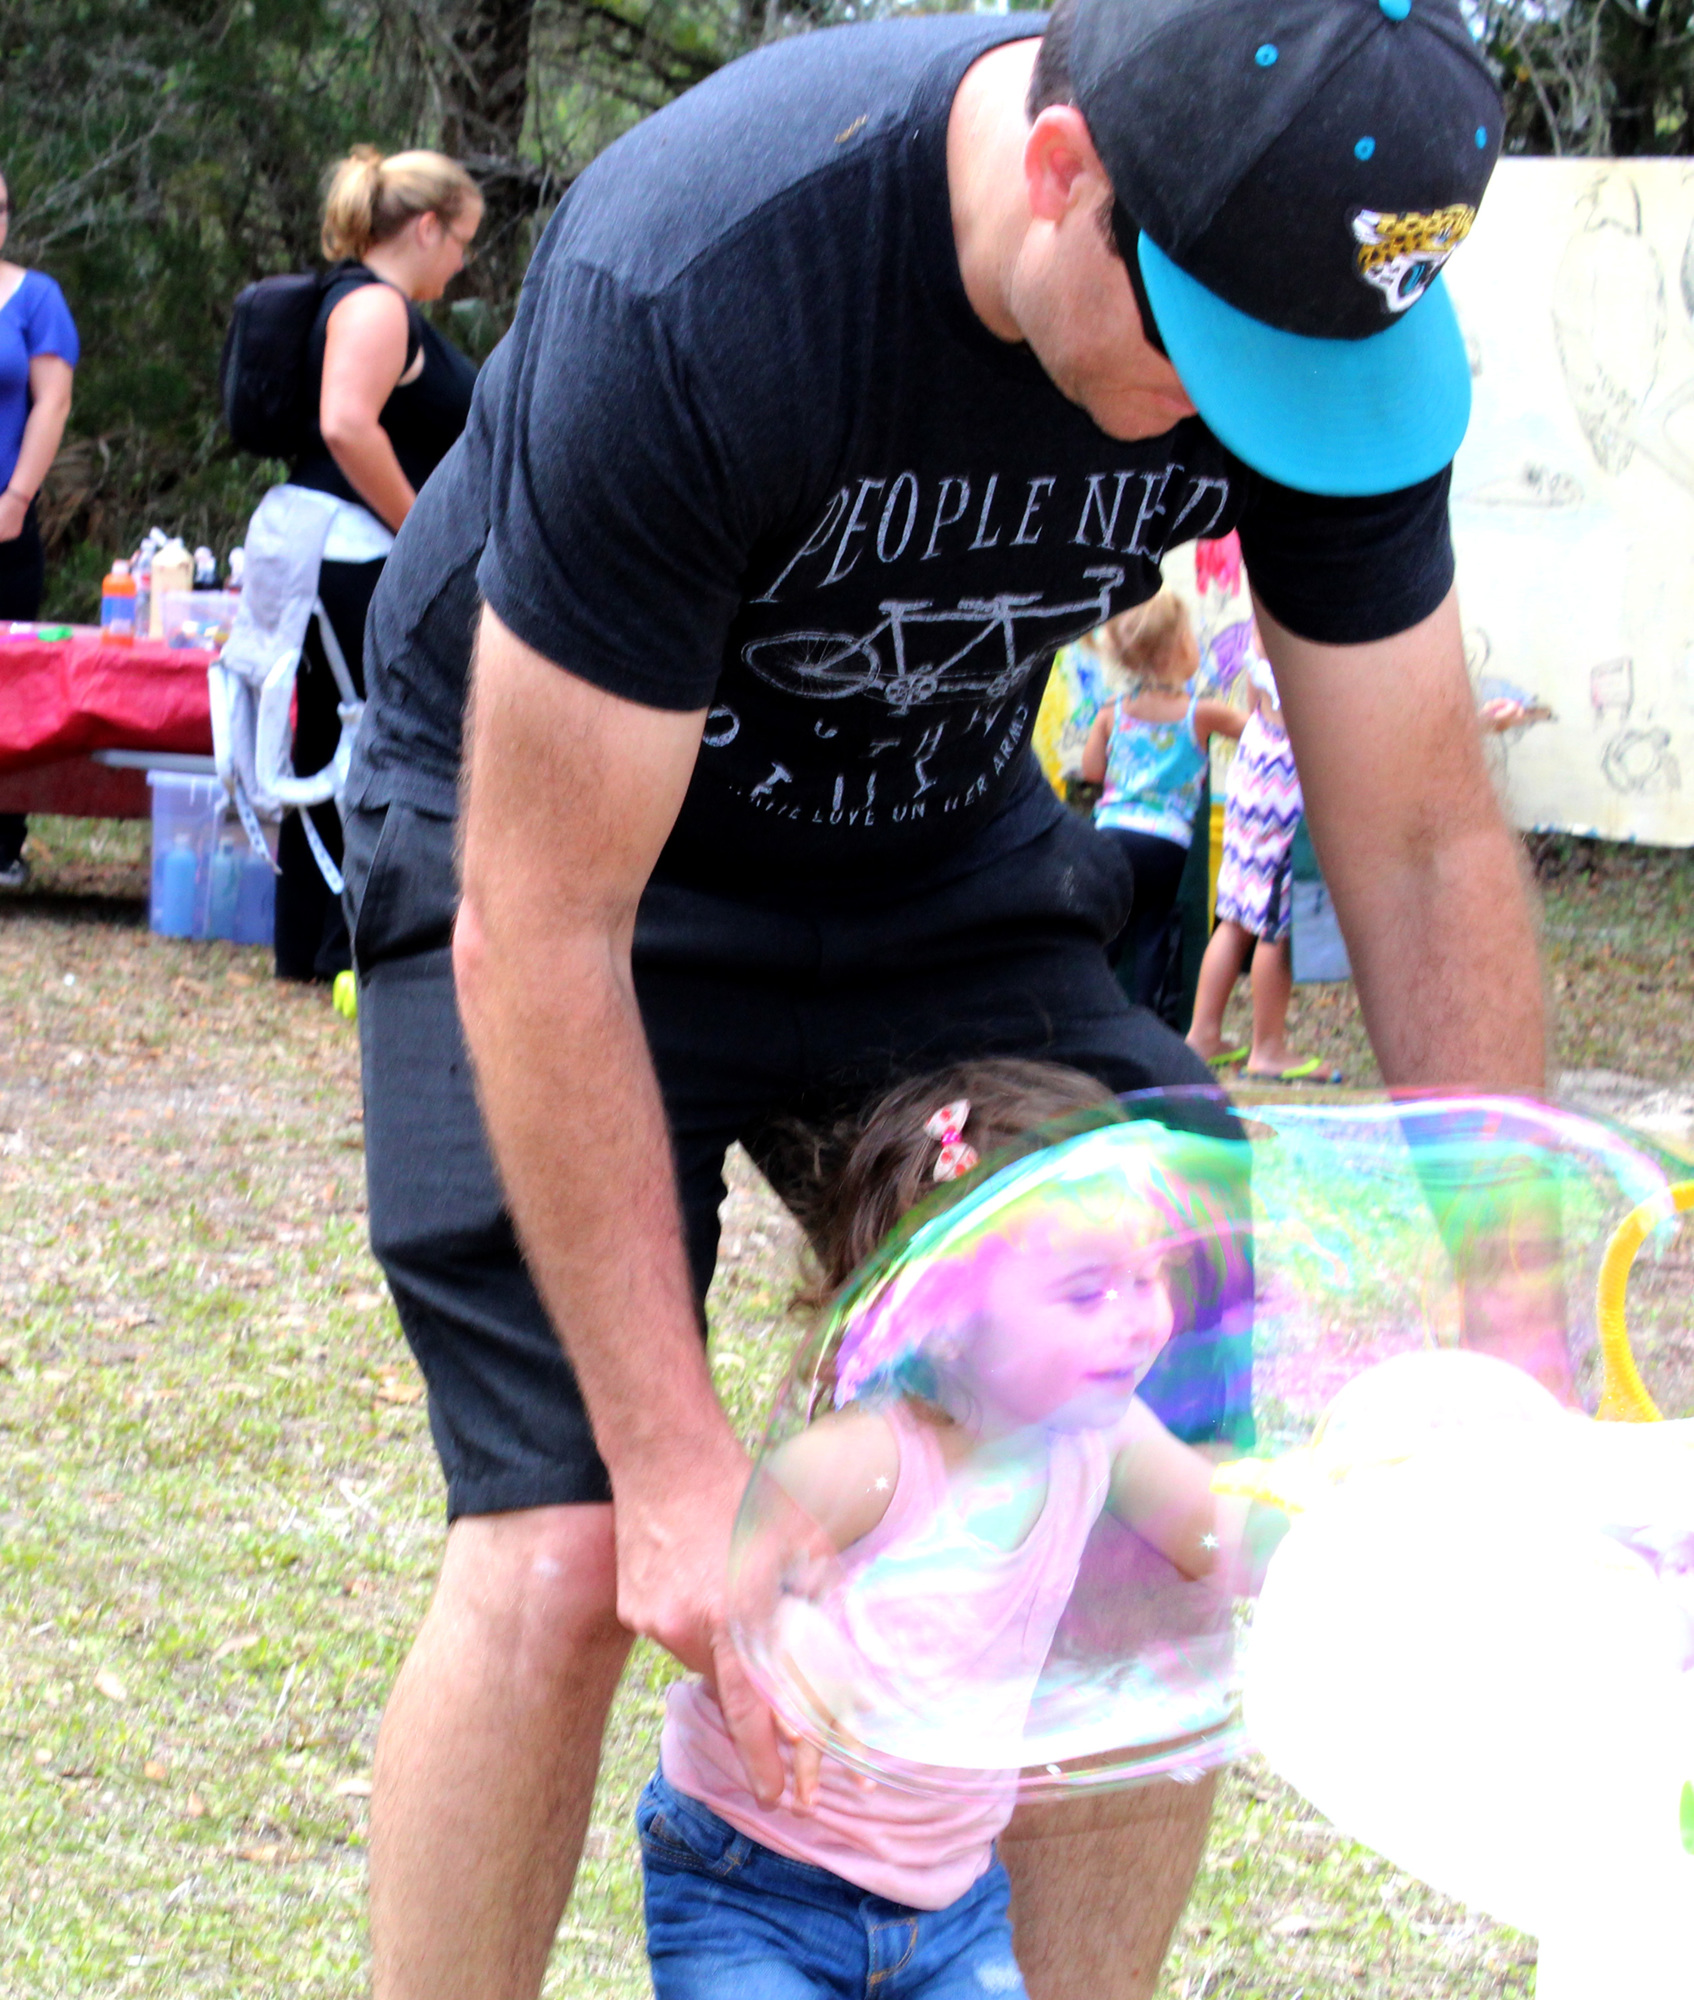 Fiona Arnold, 20 mos, looks through a huge bubble her dad, Robin Arnold held for her. Photo by Jacque Estes